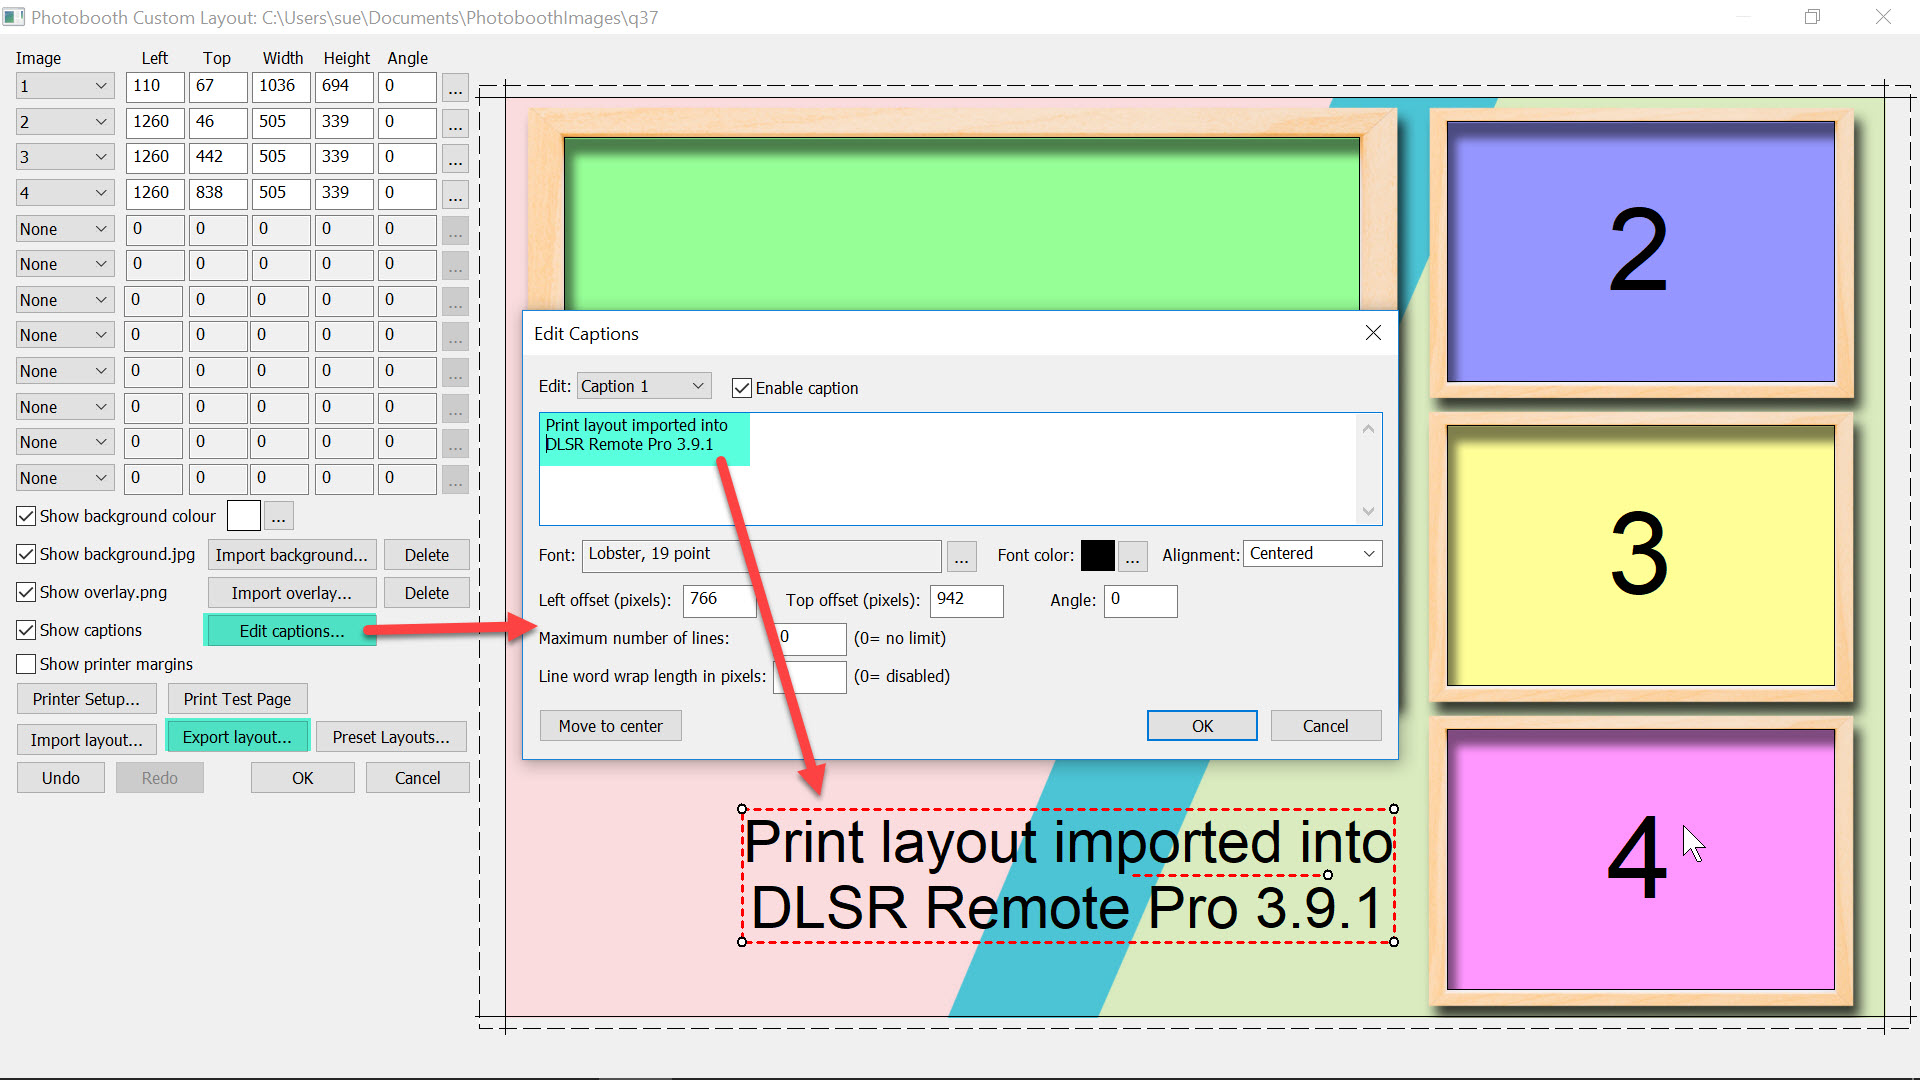 Editing a caption in the Print Layout Editor DSLR Remote Pro 3.9.1